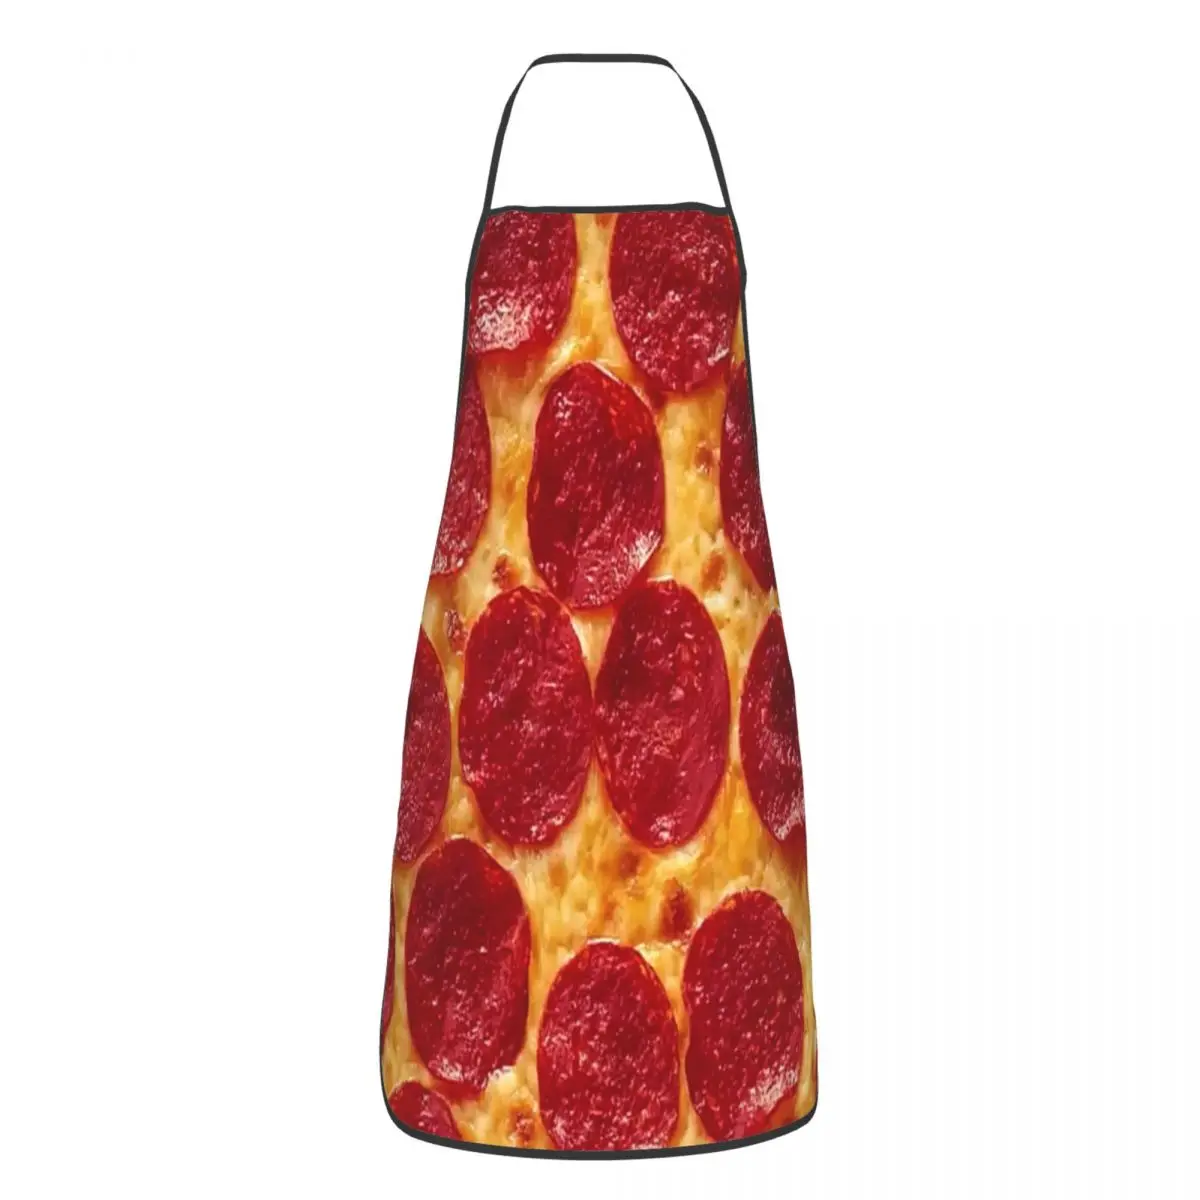 

PIZZA Food Cheese Bread Kitchen Cuisine Apron Polyester Bib Tablier for Men Women Chef BBQ Dinner Party